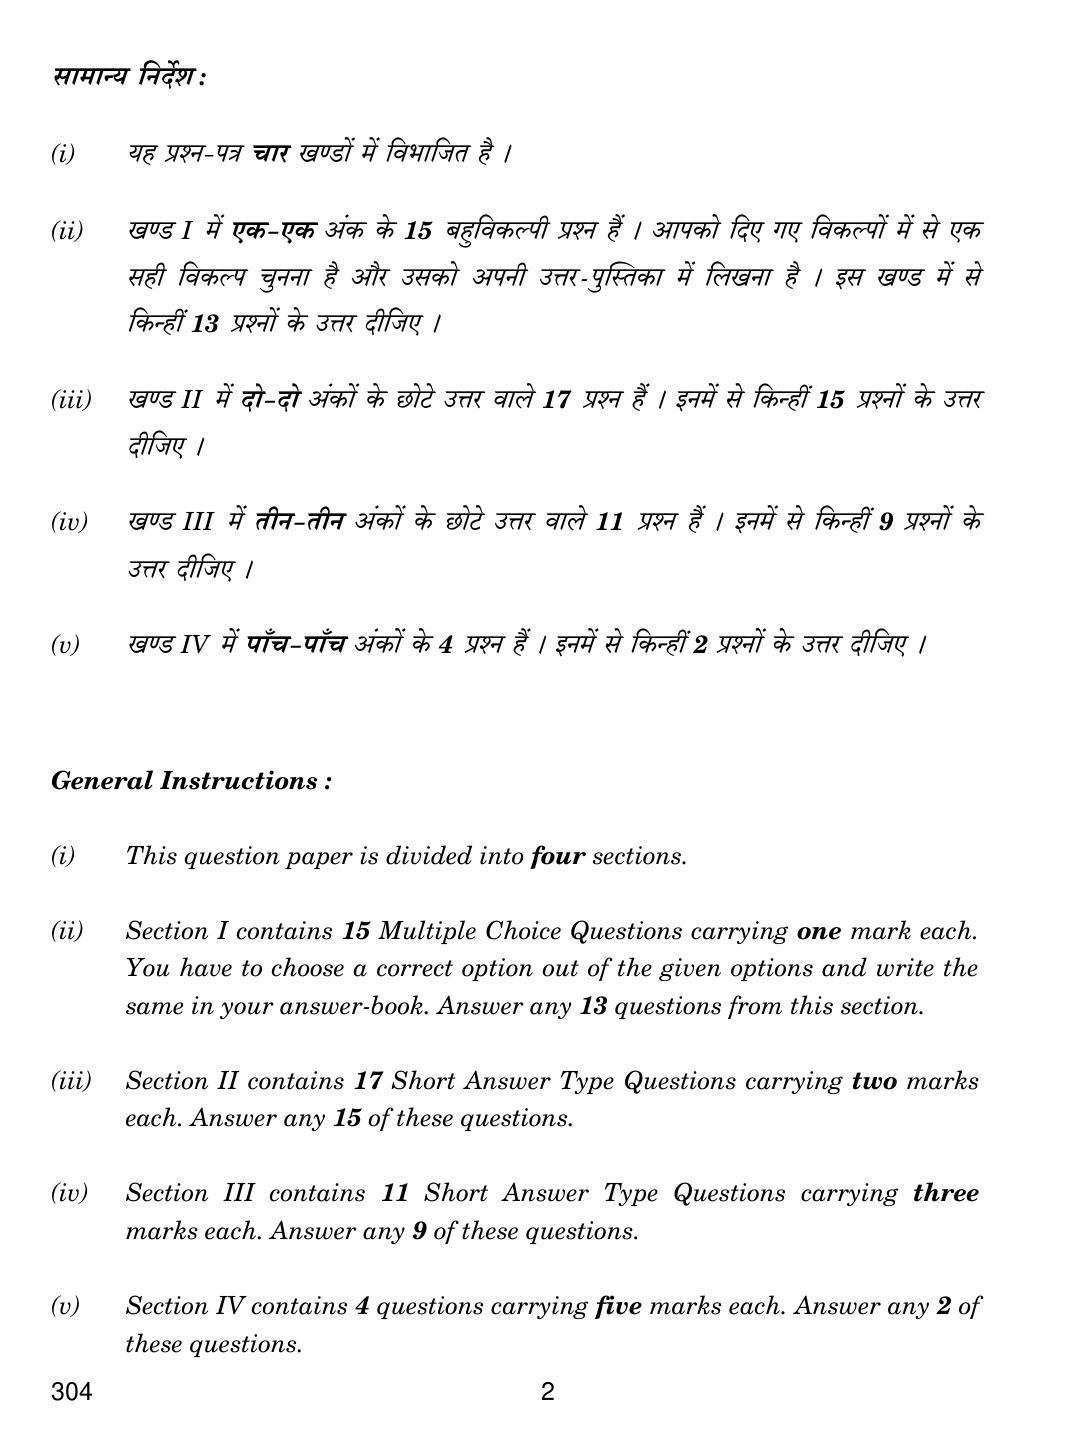 CBSE Class 12 304 FINANCIAL ACCOUNTING 2018 Question Paper - Page 2